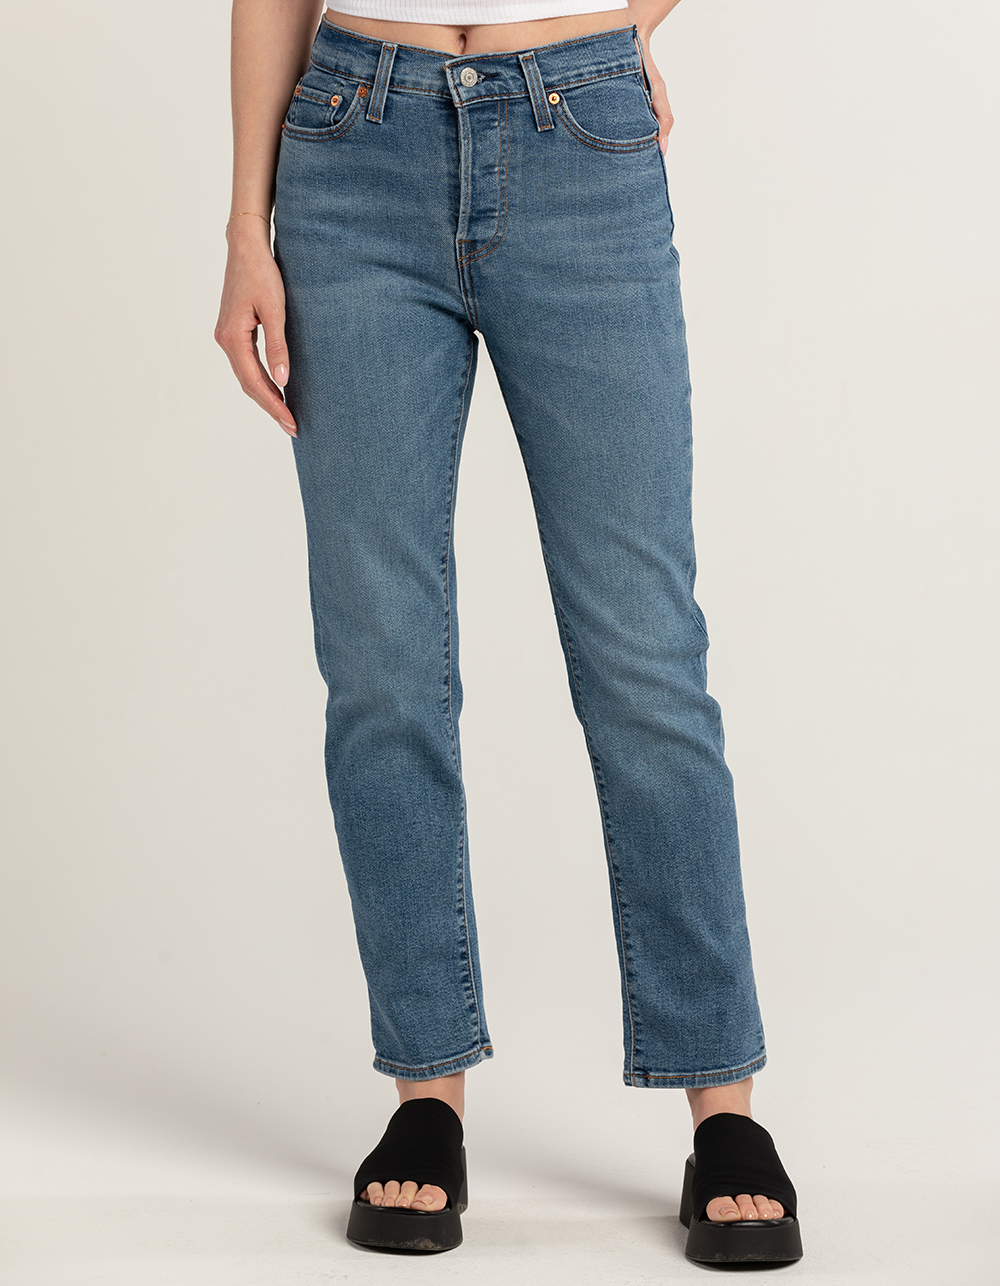 LEVI'S Wedgie Straight Womens Jeans - Summer Love In The Mist - MED BLAST